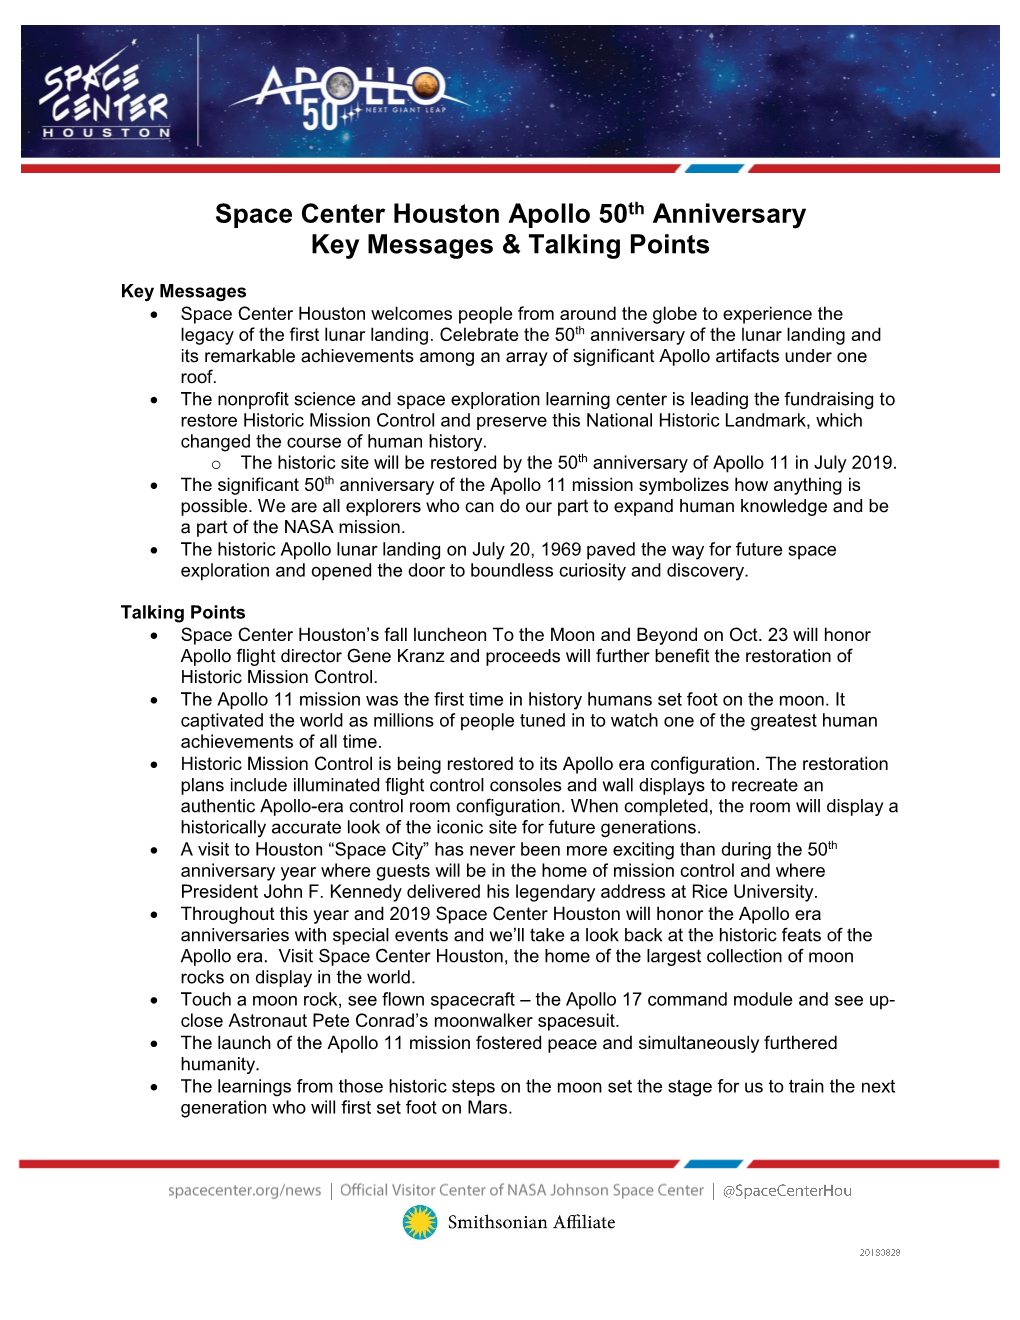 Space Center Houston Apollo 50Th Anniversary Key Messages & Talking Points